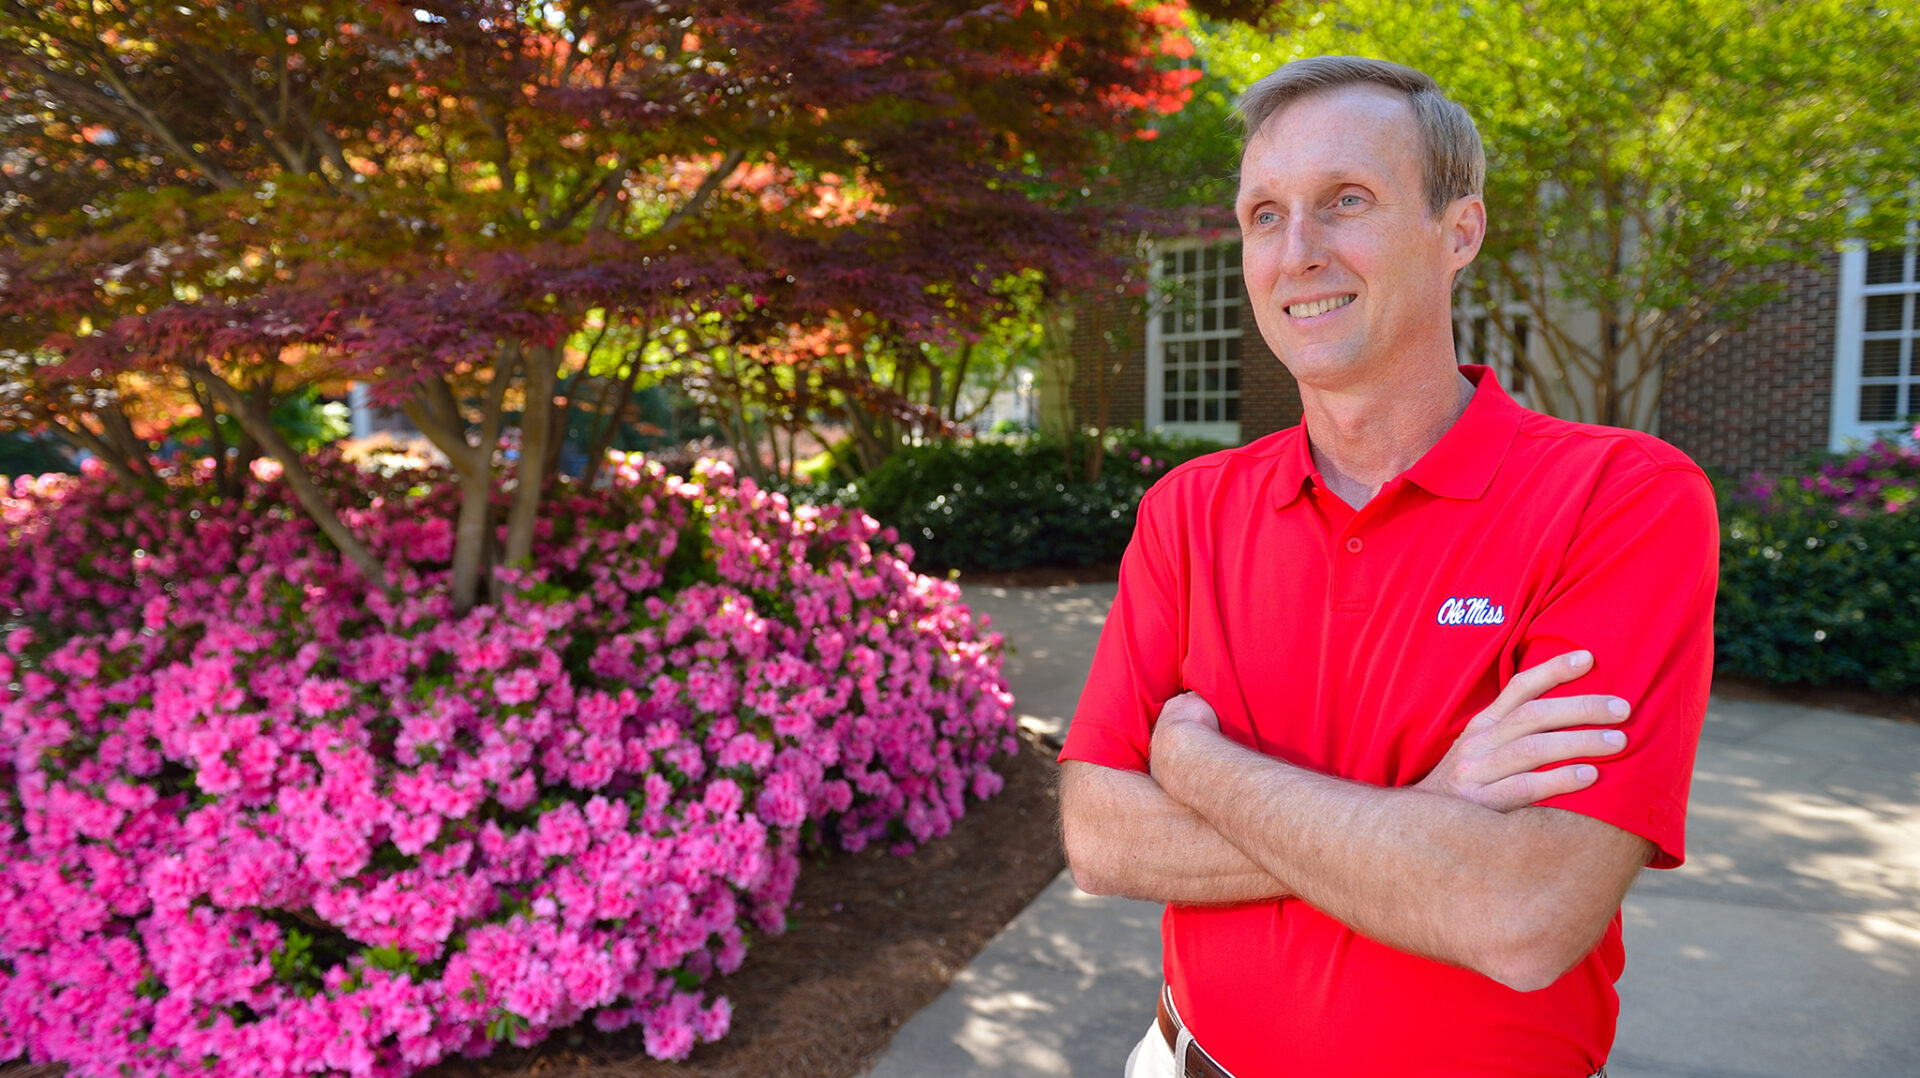 Jeff McManus, University of Mississippi director of landscape, airport and golf operations, has been honored with the Professional Grounds Management Society's President's Award.Photo by Robert Jordan/Ole Miss Communications